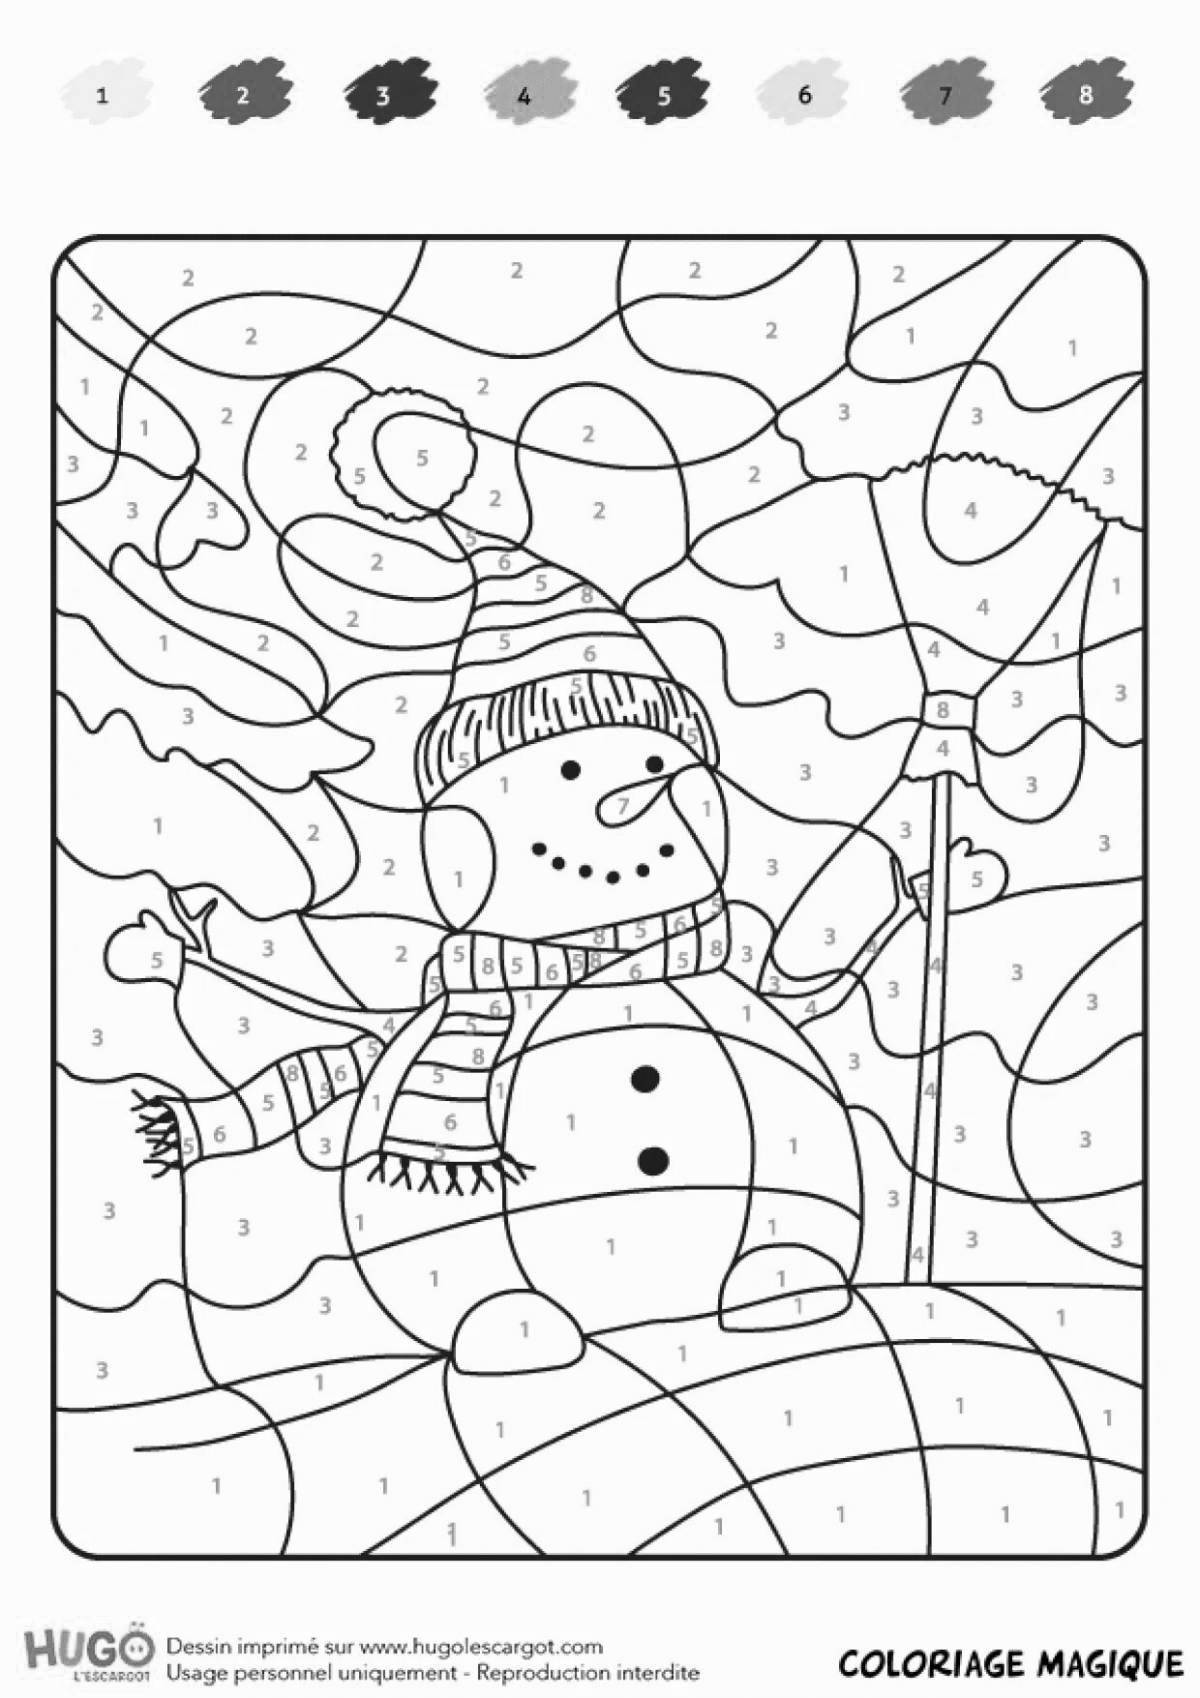 Exotic snowman coloring by numbers